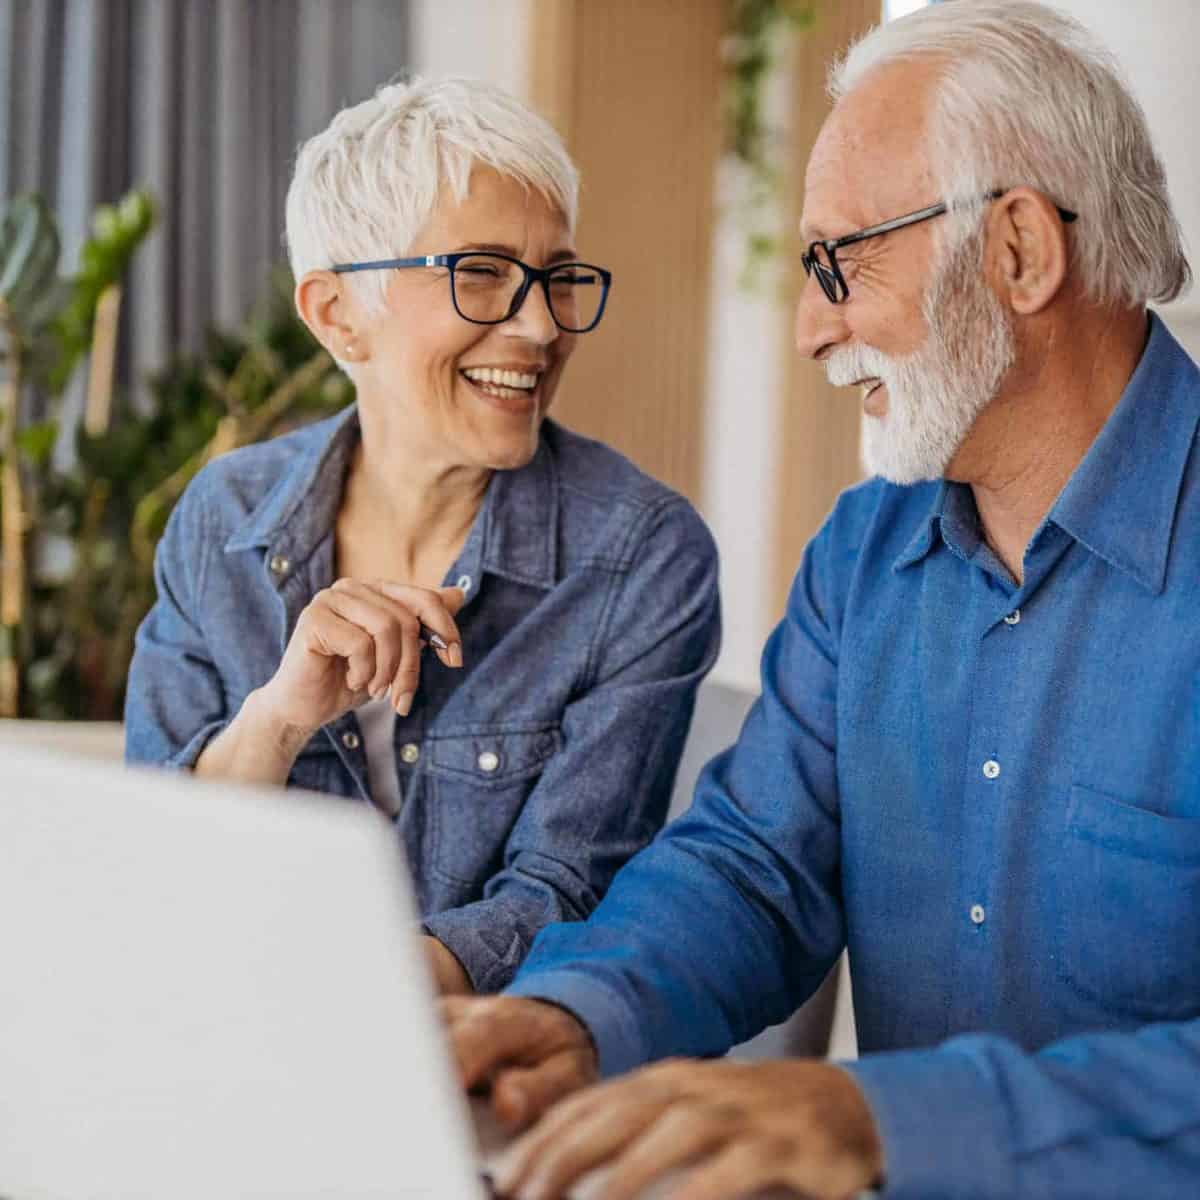 Gonzales Precious Metals IRA & Investing Company Copy of Senior couple at laptop smiling GettyImages 1323096524 1200x1200 1